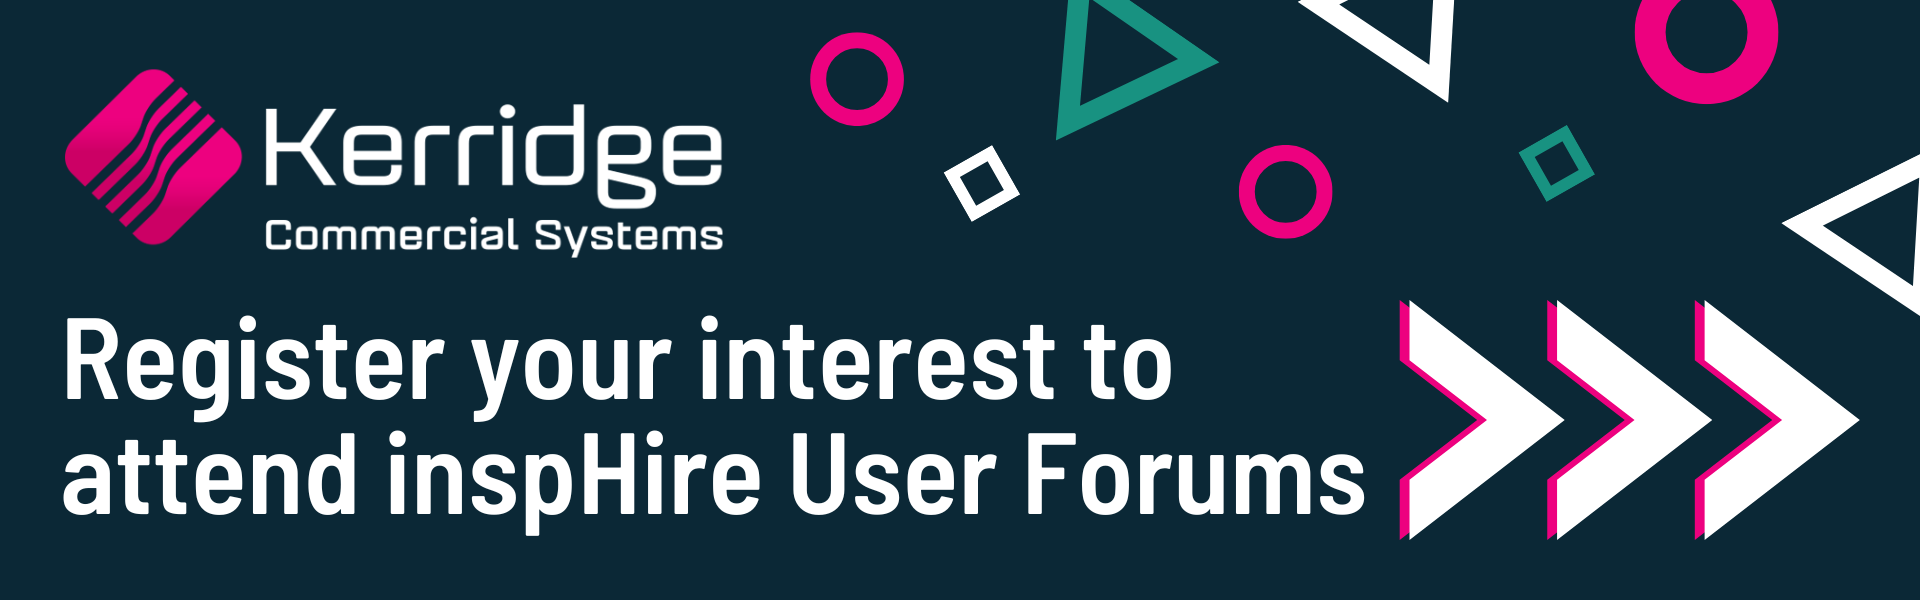 Register your interest to attend inspHire User Forums